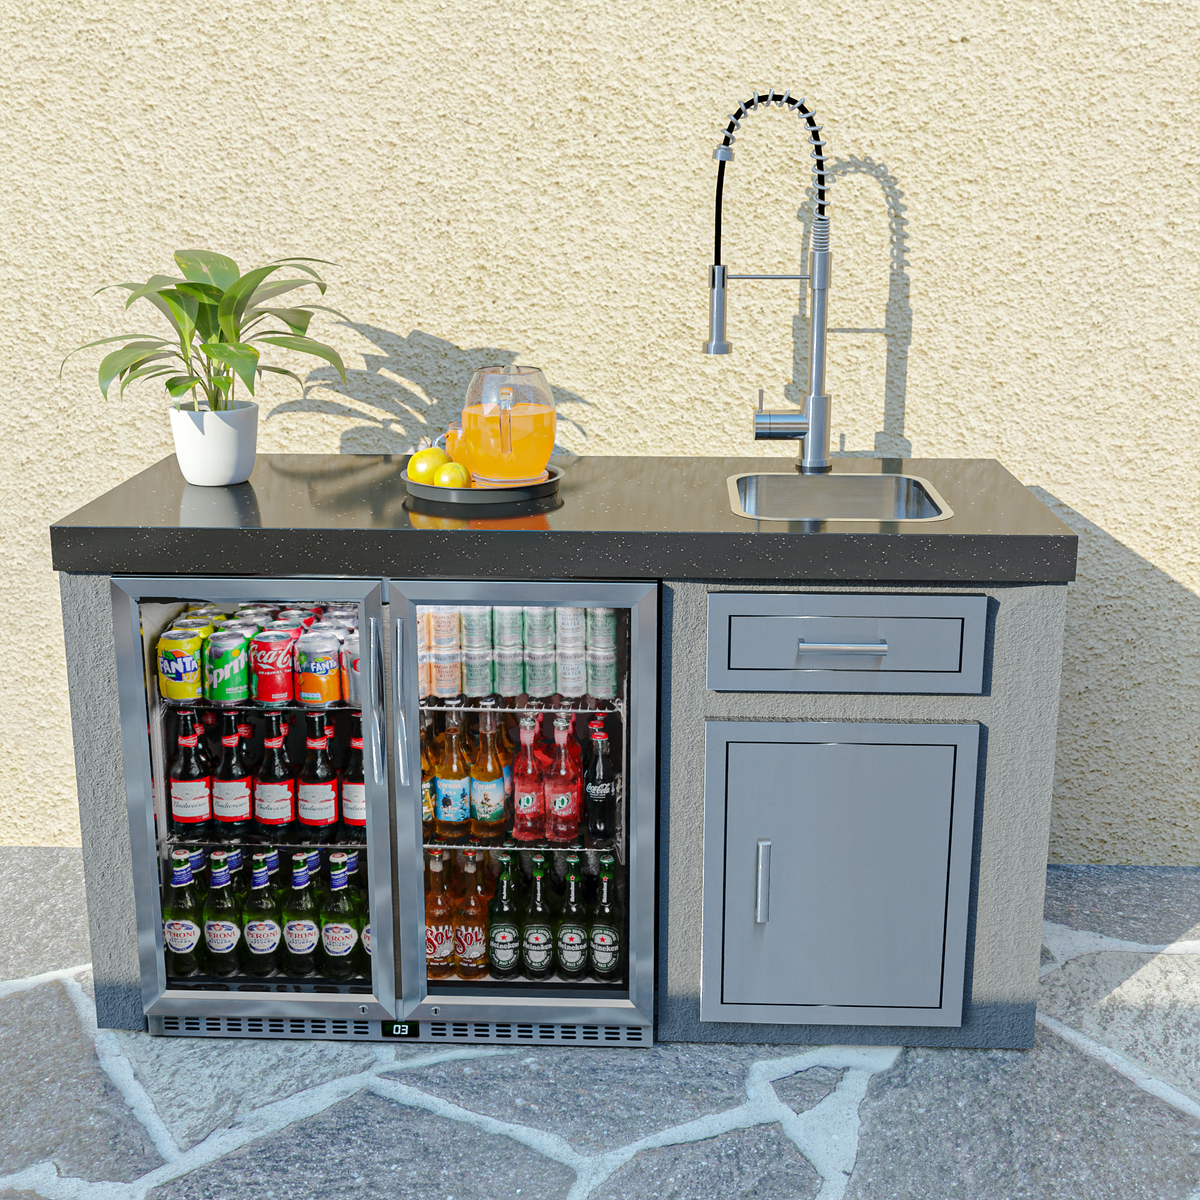 Draco Grills Avalon Stainless Steel Outdoor Kitchen Double Fridge and Sink